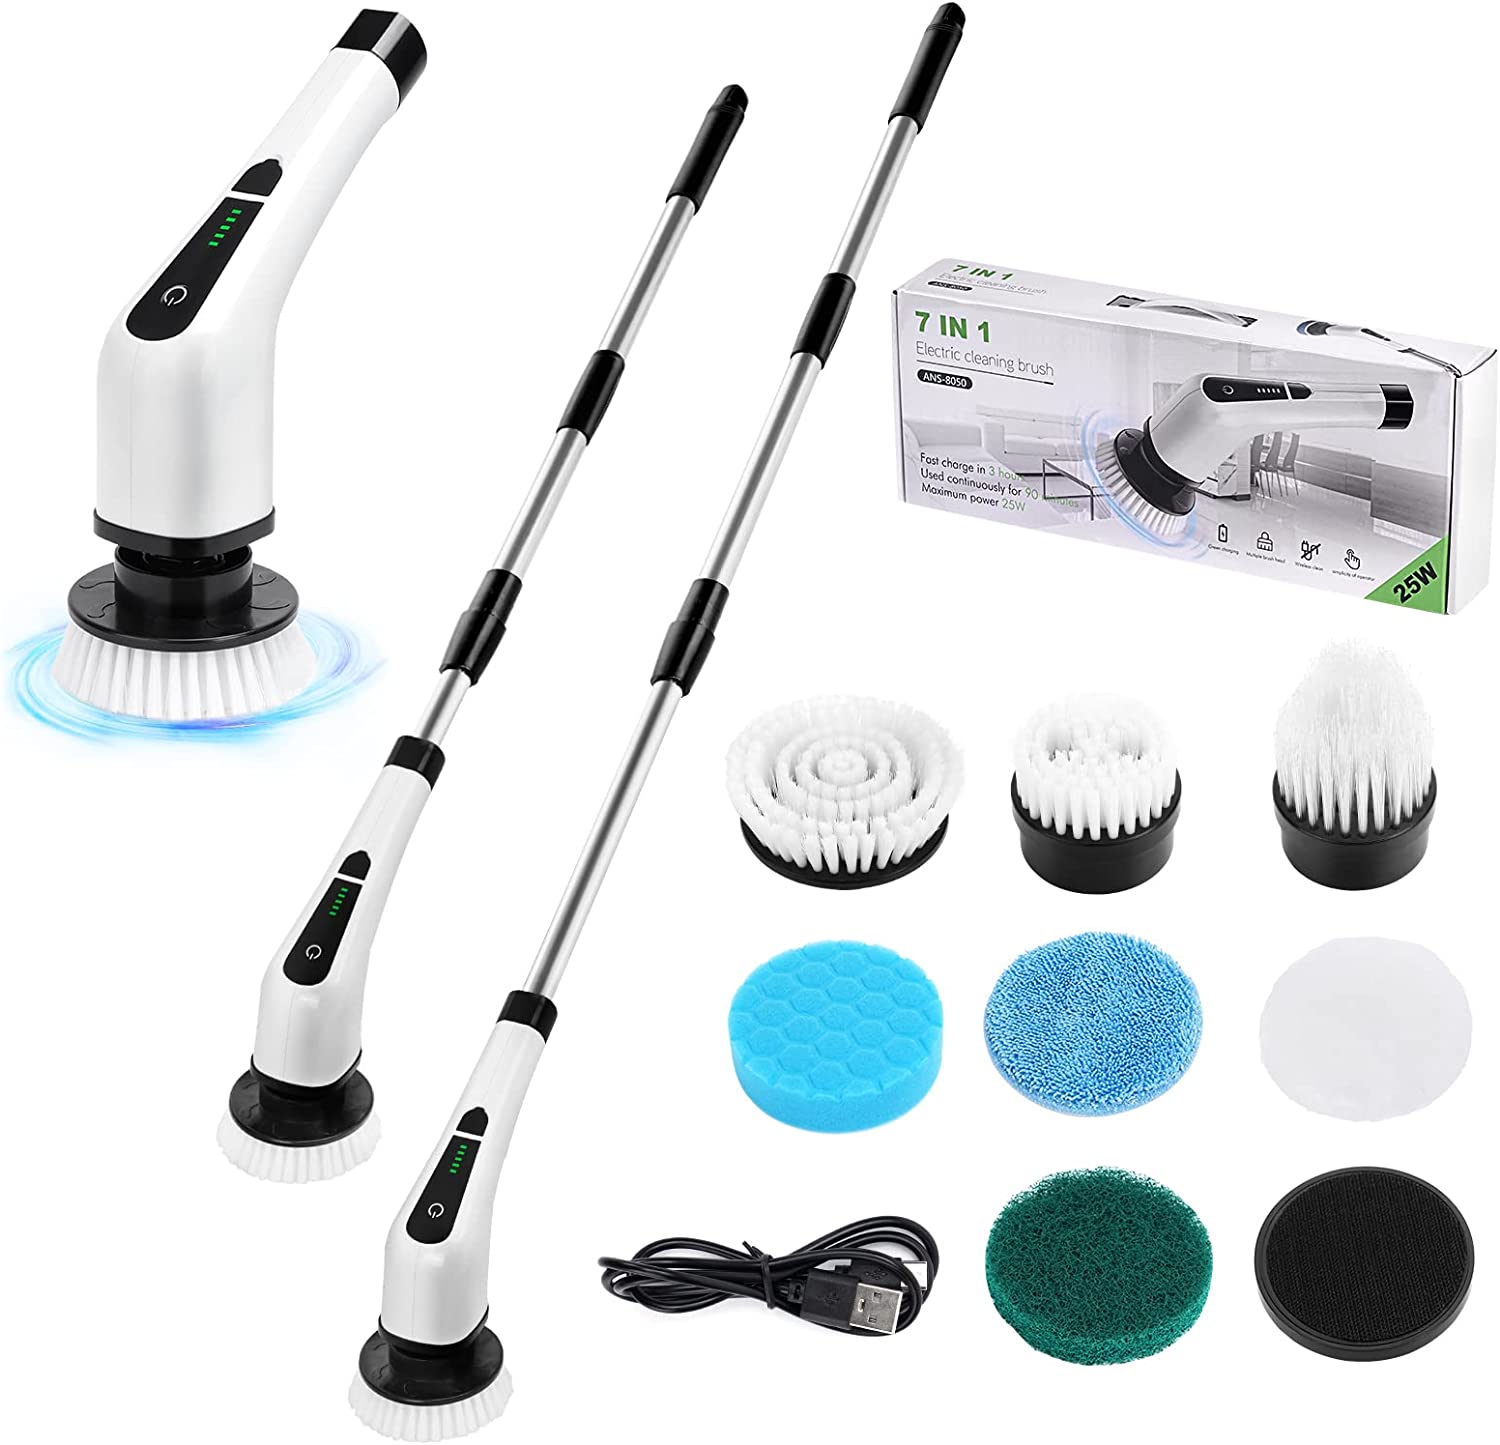 iDOO Electric Spin Scrubber, Shower Scrubber Cleaning Brush with 5 Replaceable Brush Heads, Cordless Power Scrubber with Adjustable Long Handle for